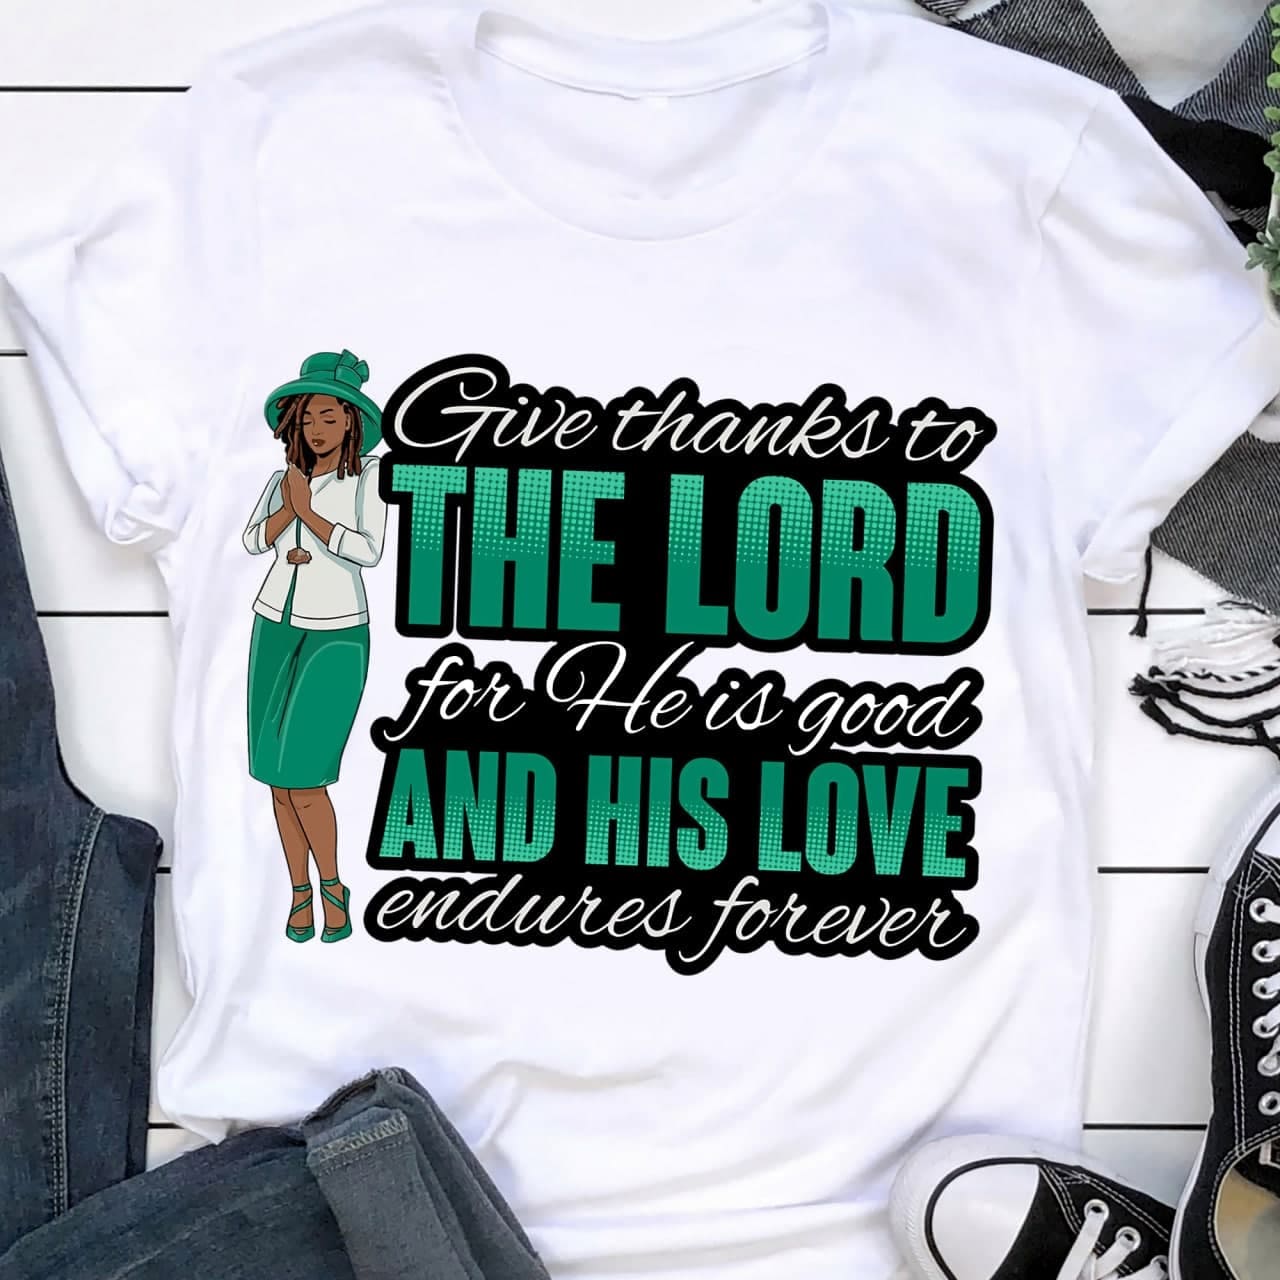 Give thanks to the lord for he is good and his love endures forever - Black woman gift, Believe in Jesus